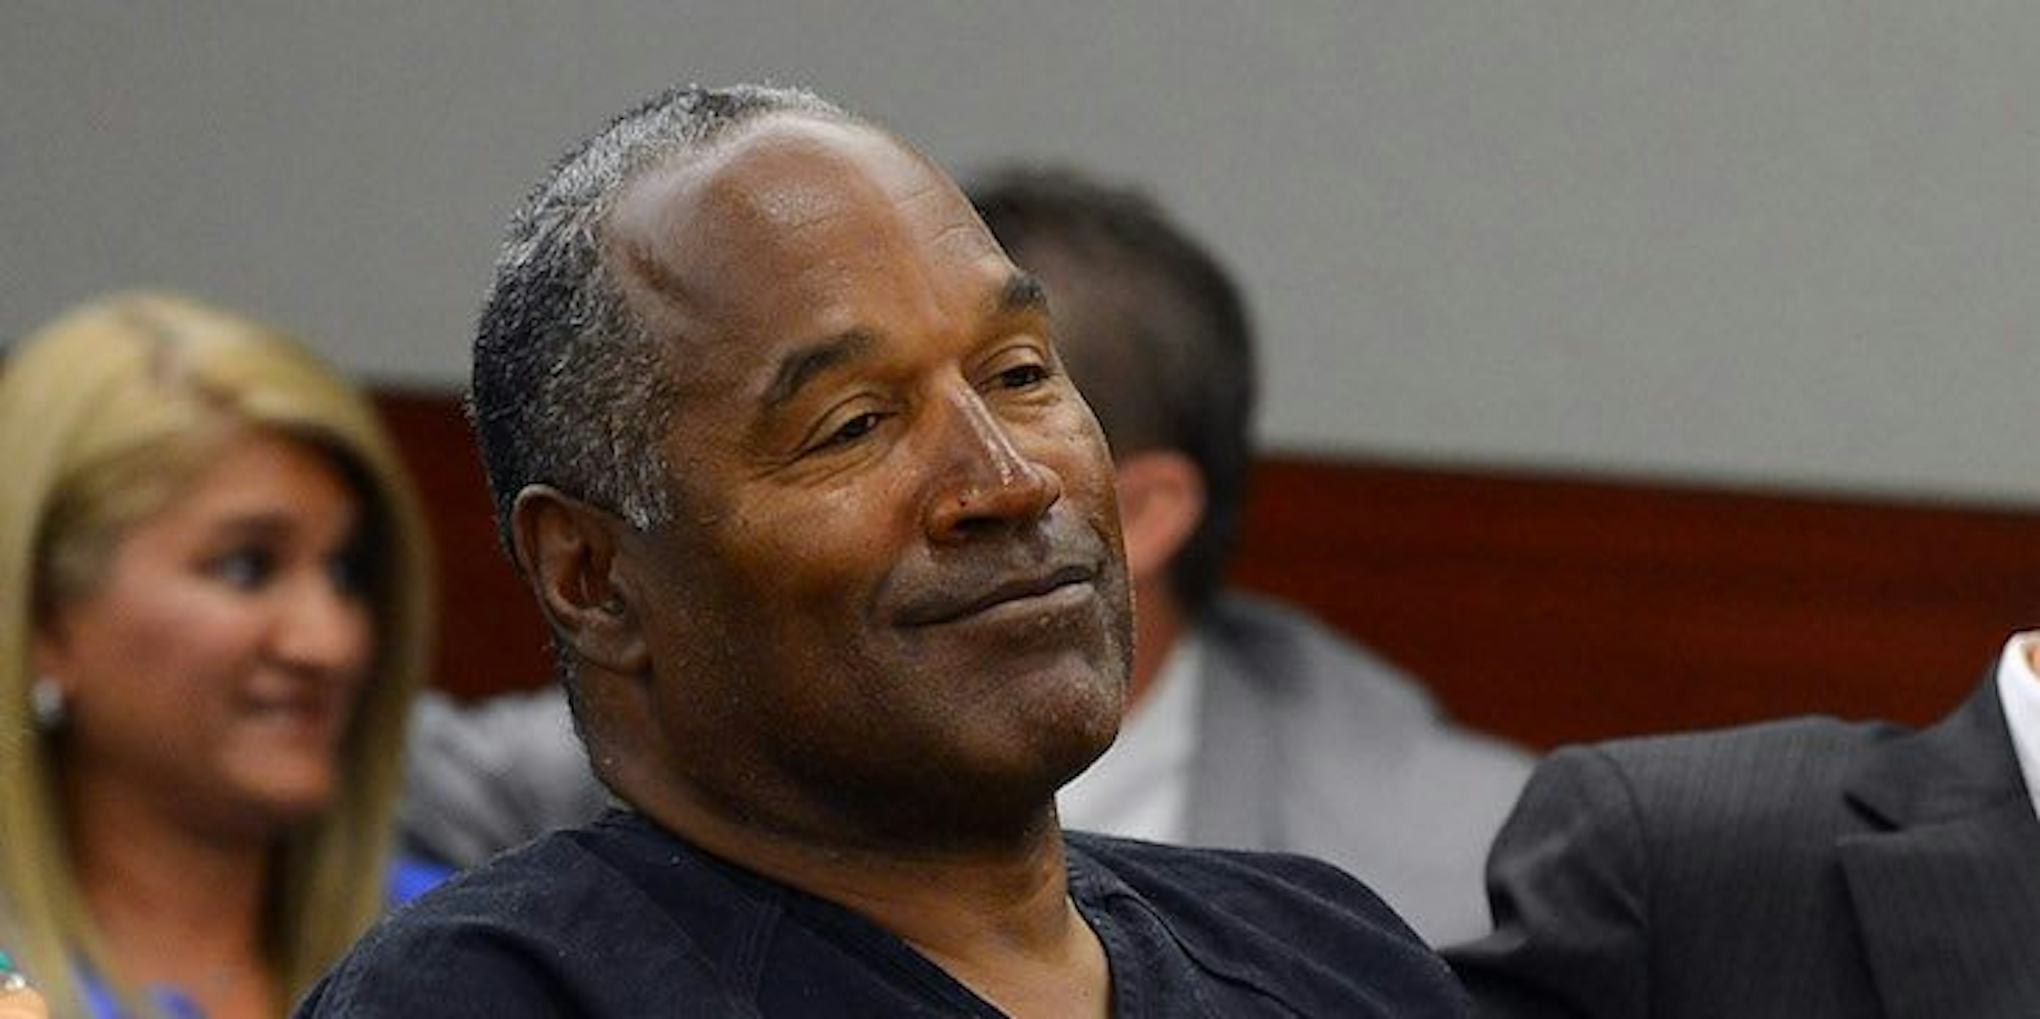 What Will OJ Simpson Do If He’s Released From Prison?